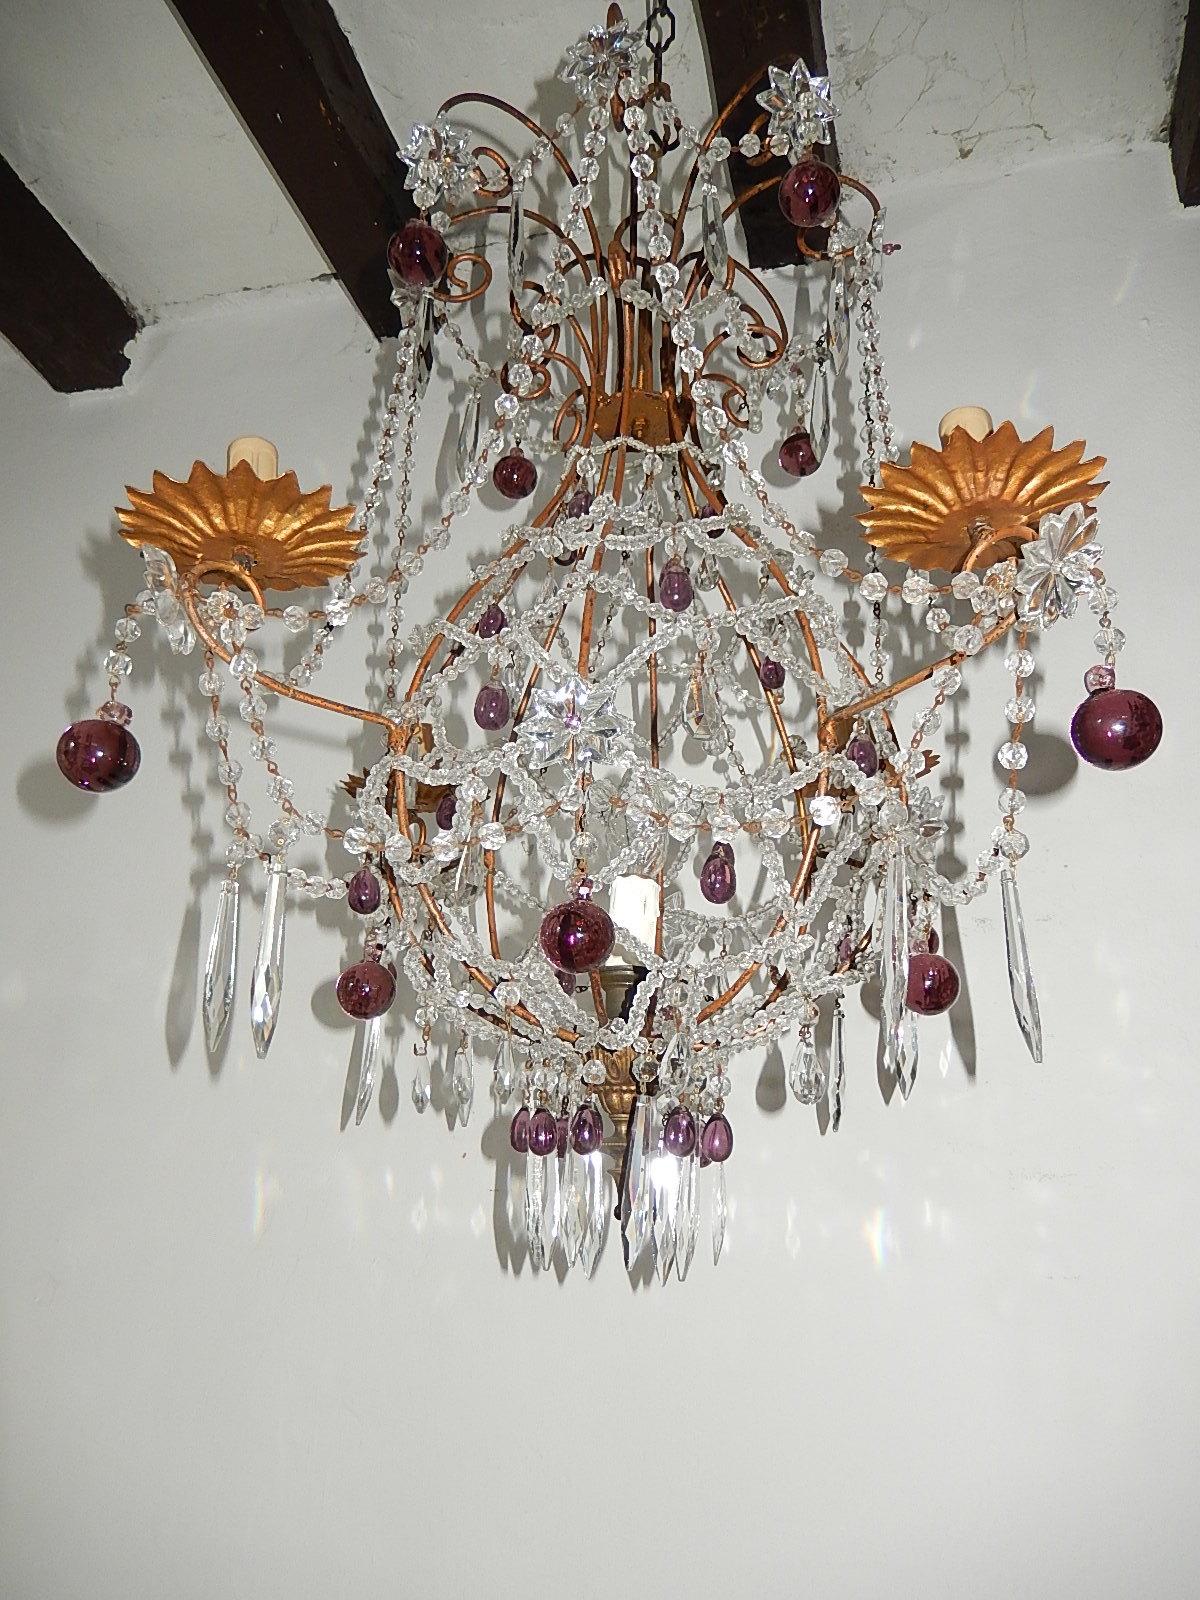 Housing 5 lights, 4 encircling and one inside. Criss-cross beading with swags of crystal beads. Adorning crystal prisms and amethyst Murano drops. Will be newly rewired with certified US UL sockets for the Usa and appropriate sockets for all other